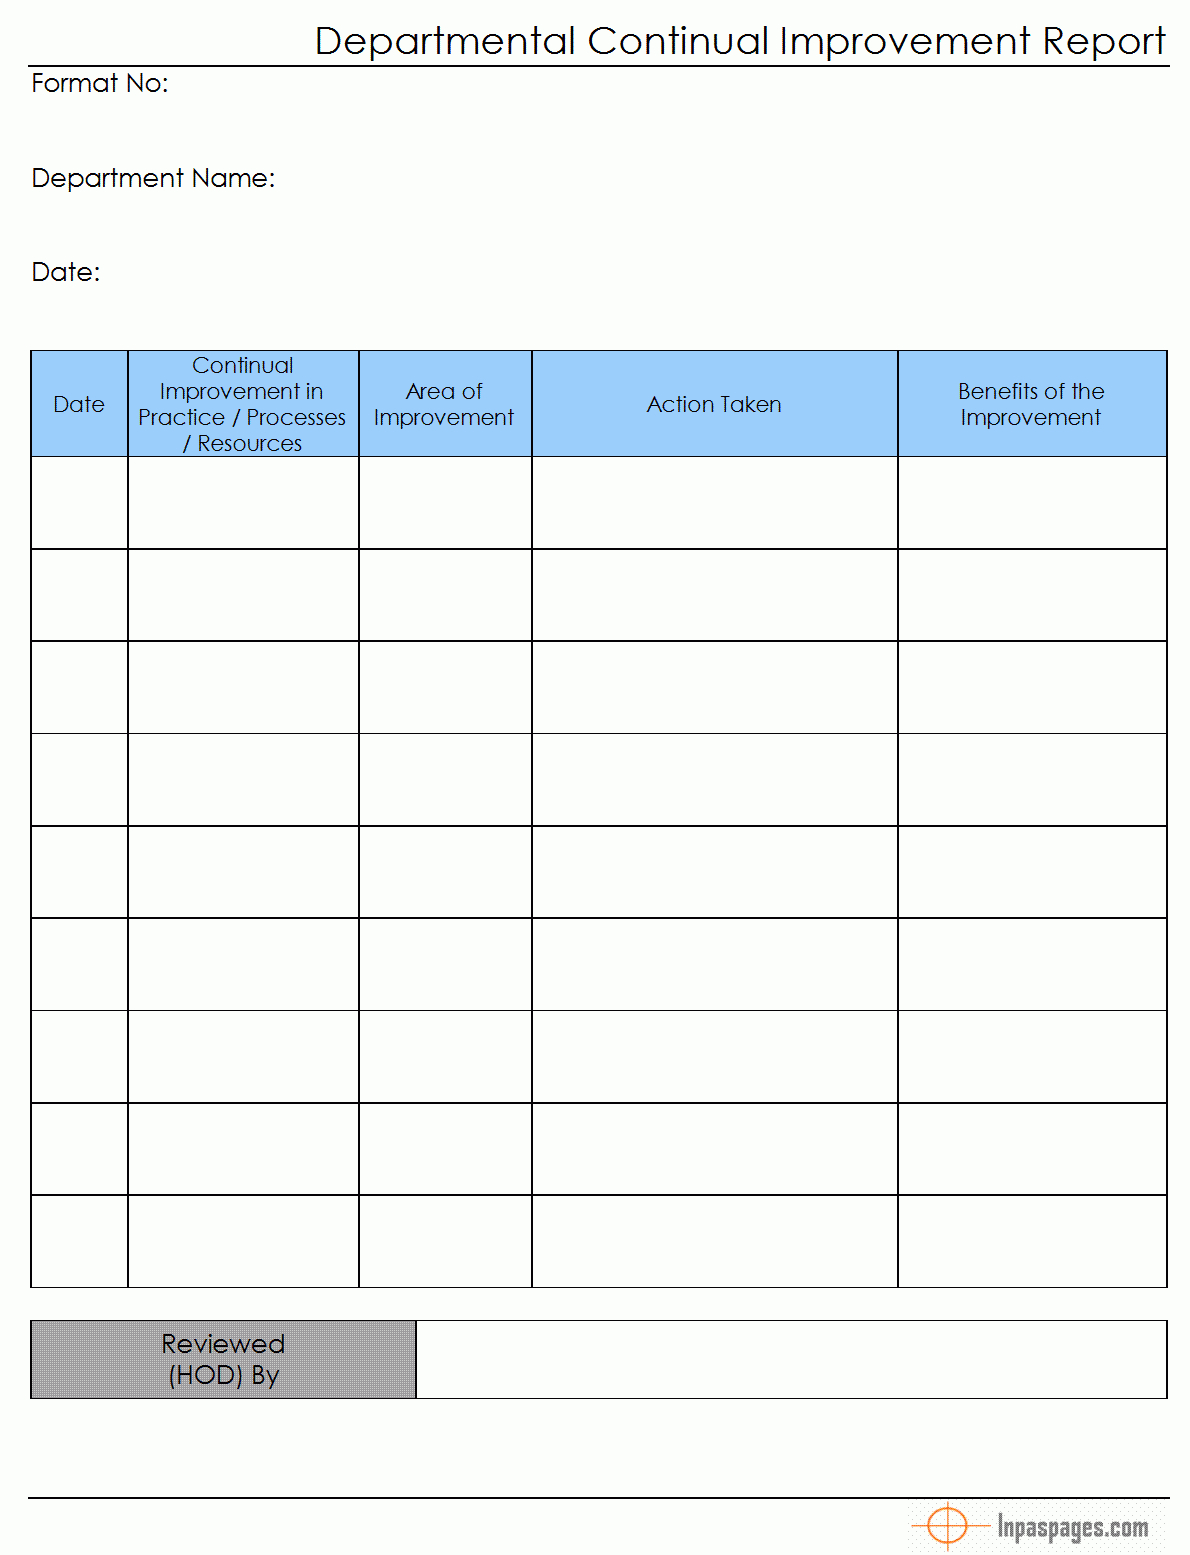 Continual Improvement Report (Departmental) - Throughout Improvement Report Template